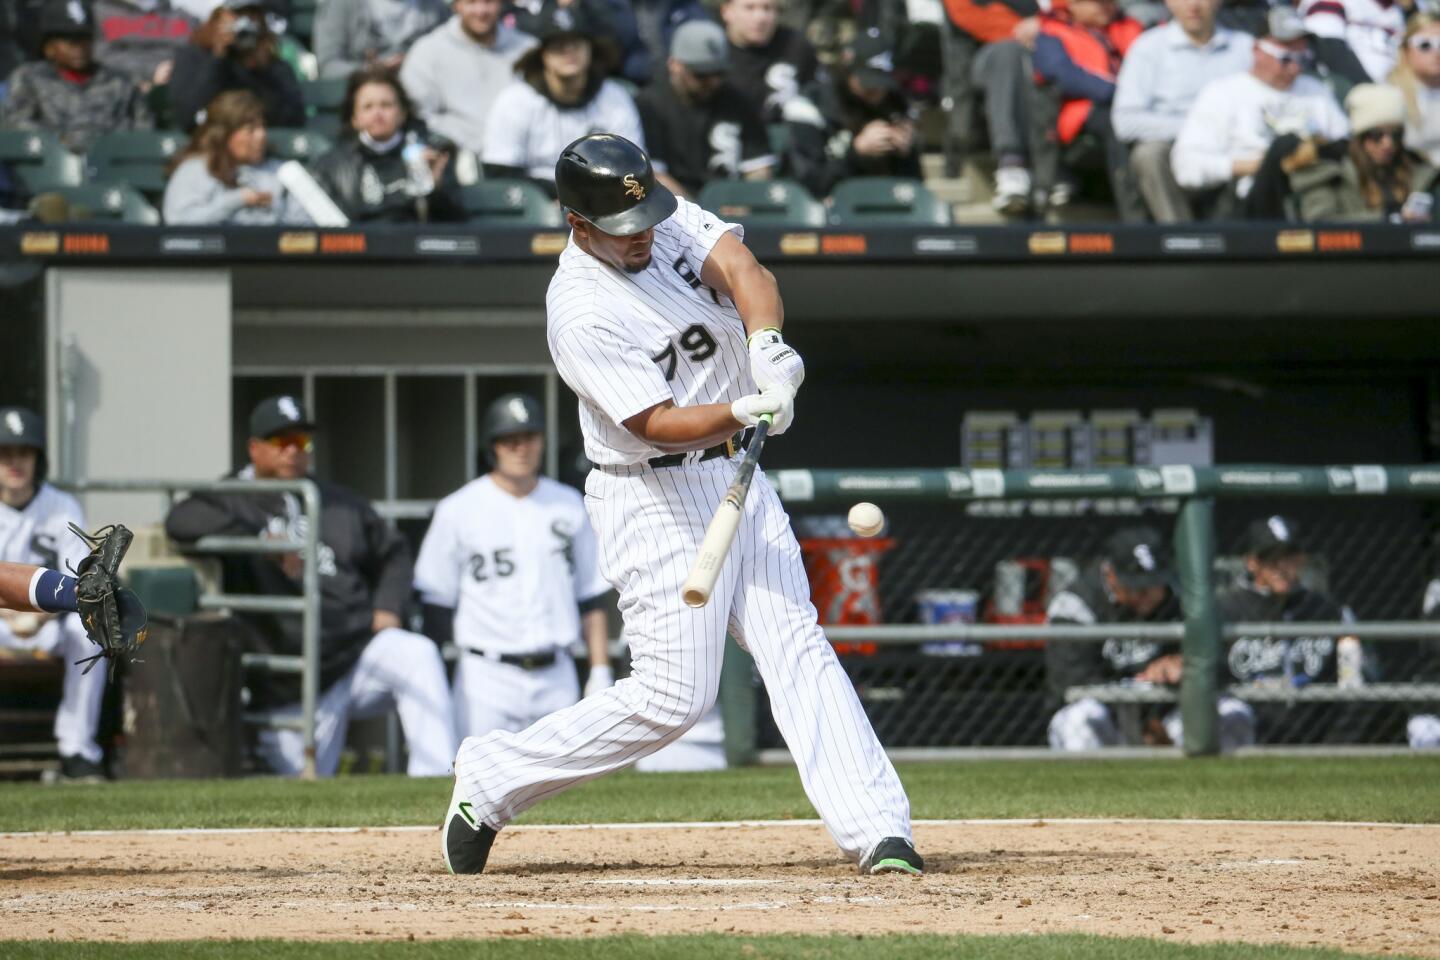 Opening day, take 2: Tigers 6, White Sox 3